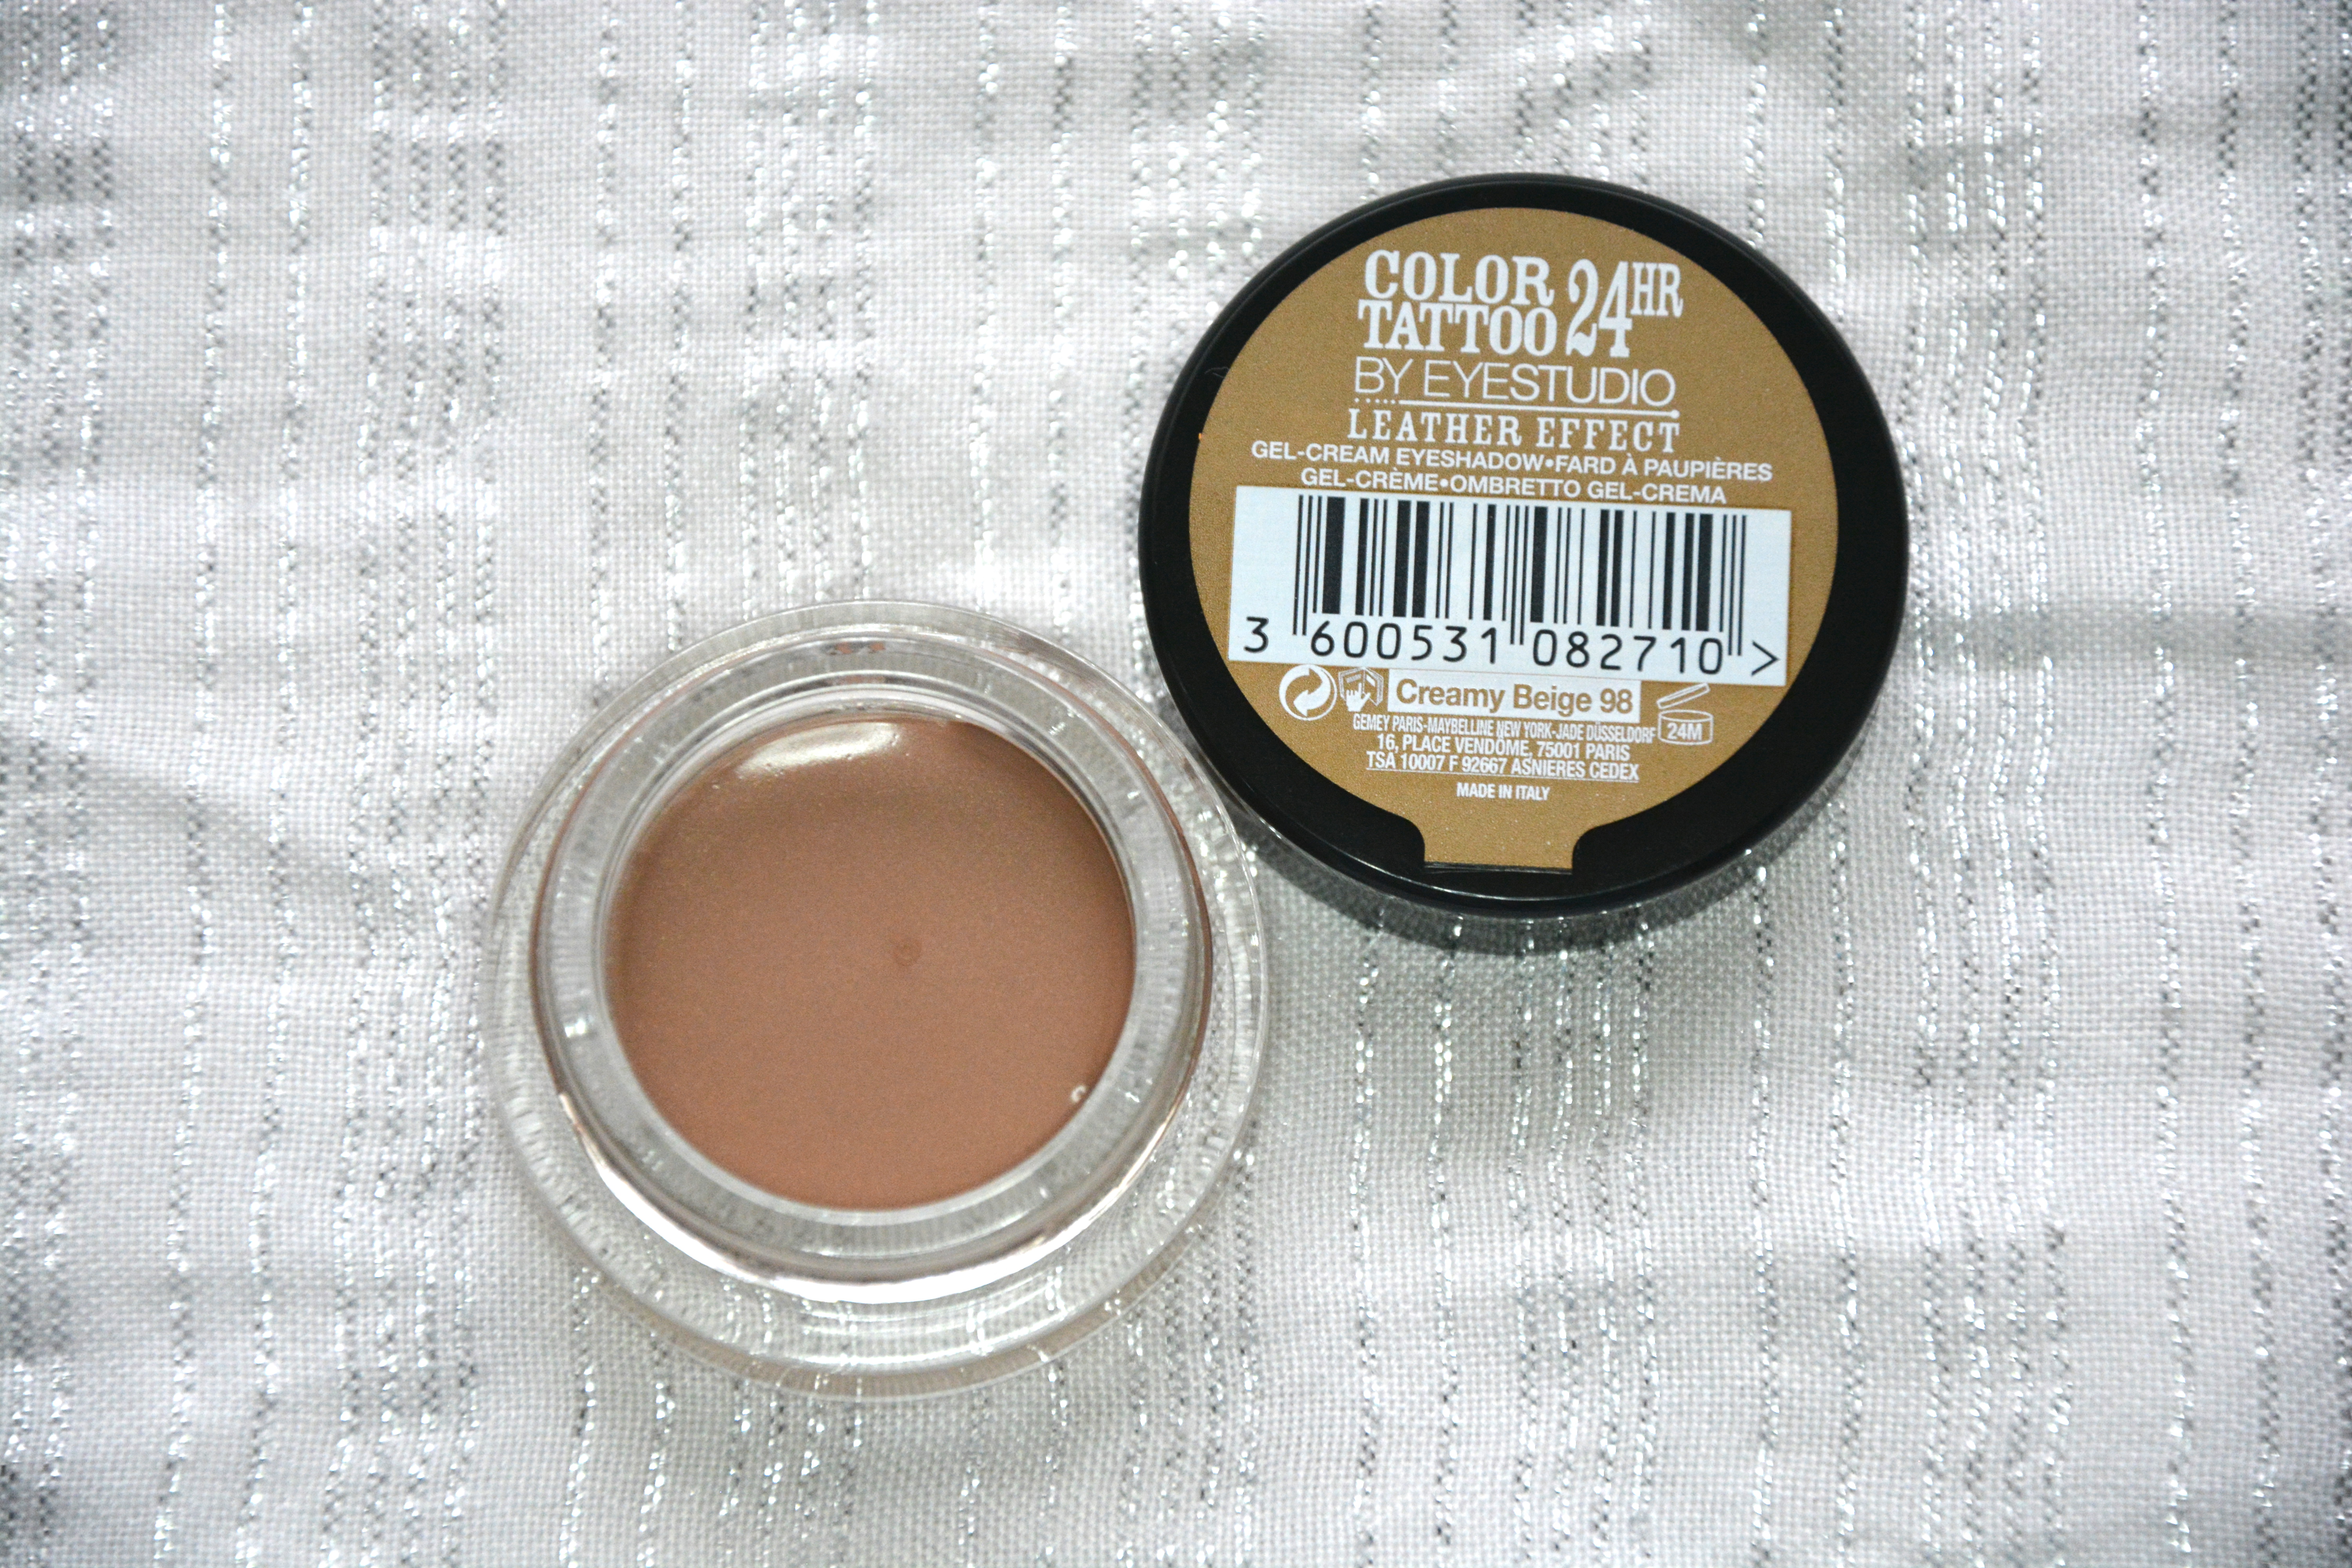 Review, Maybelline Color Tattoo – Creamy Beige